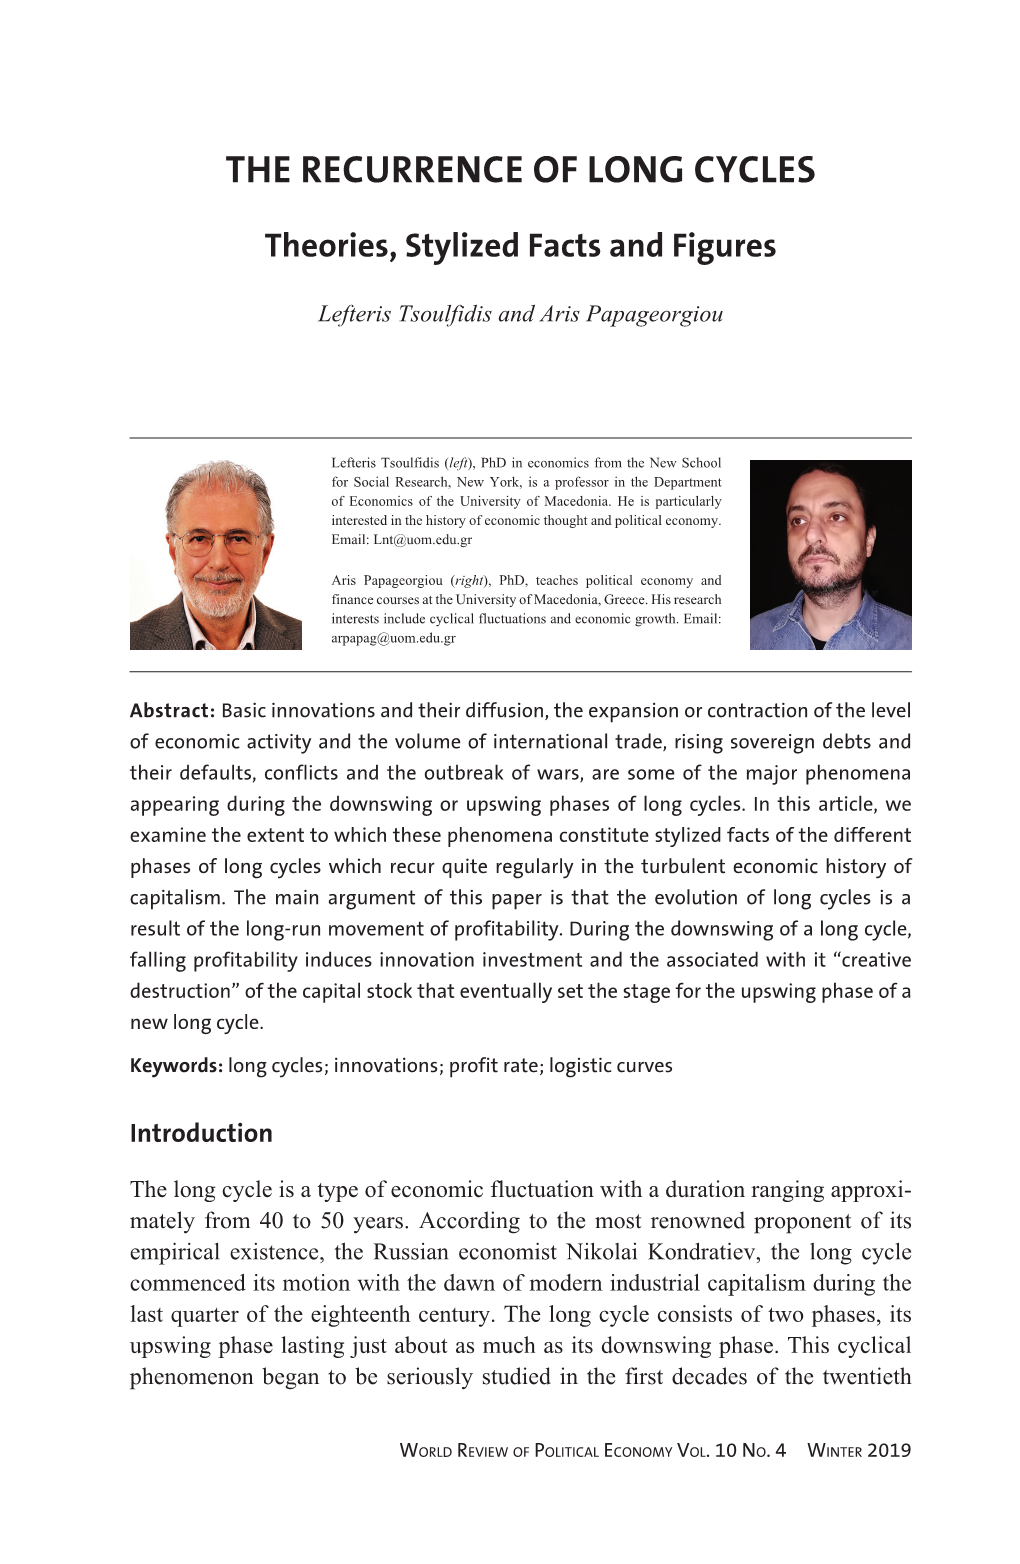 The Recurrence of Long Cycles: Theories, Stylized Facts and Figures, Lefteris Tsoulfidis and Aris Papageorgiou